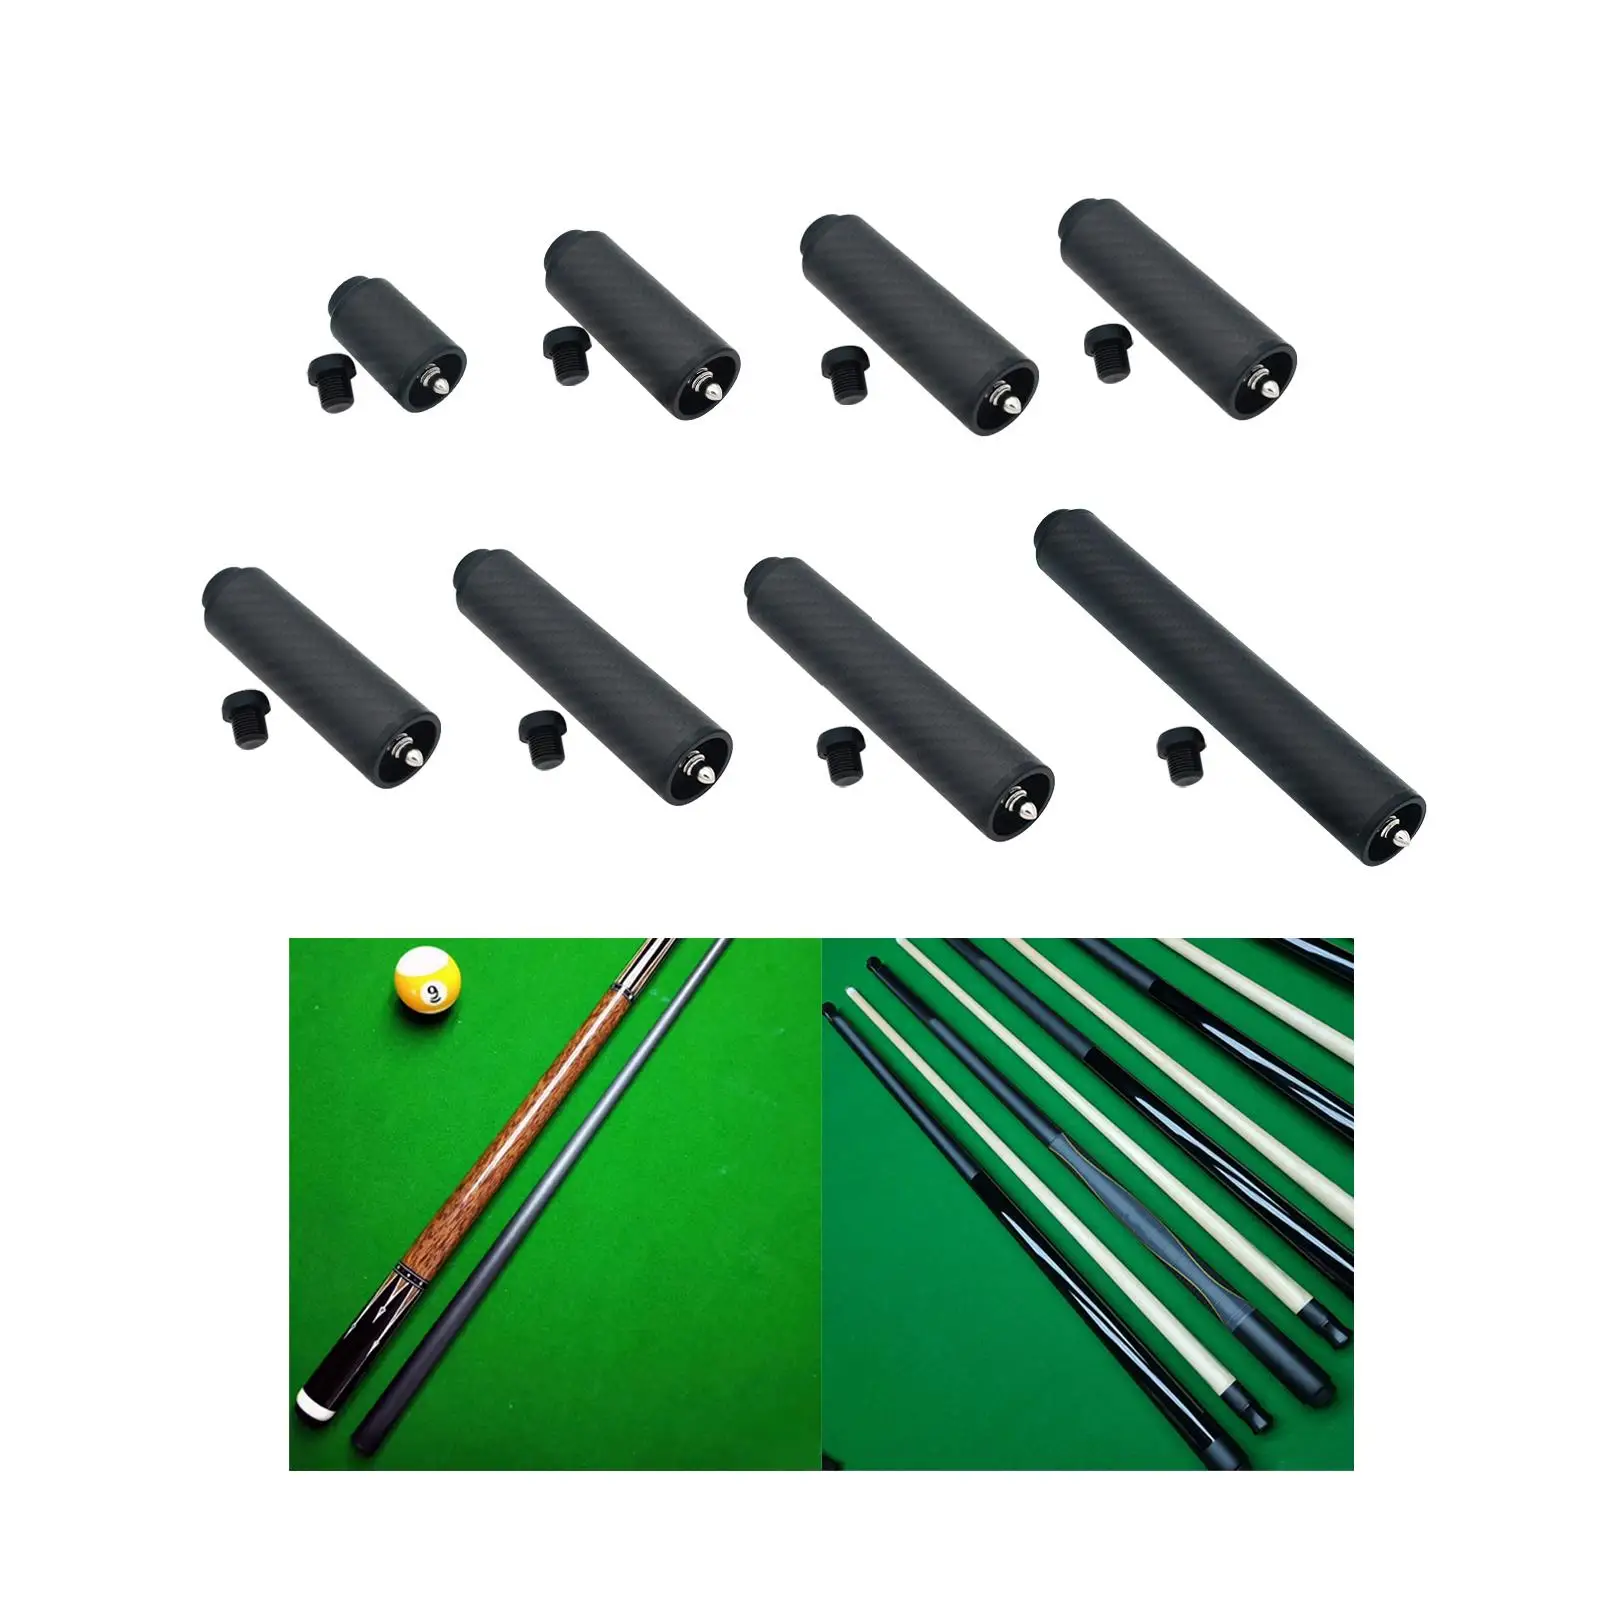 Billiards Pool Cue Extension Compact Cue End Lengthener Cue Stick Extender